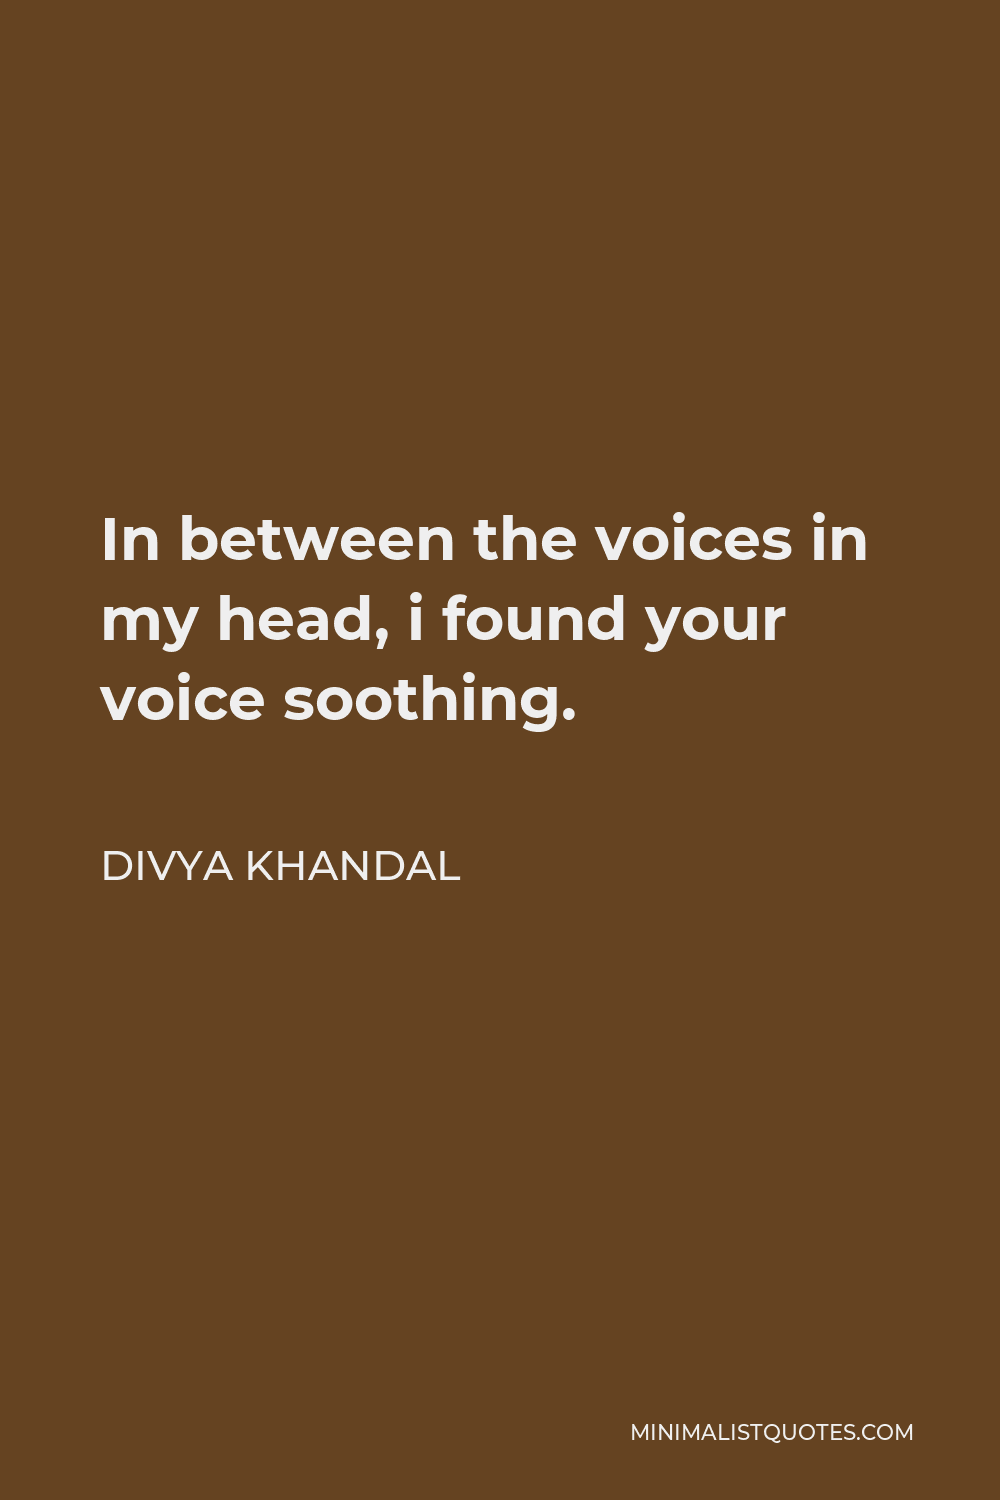 Divya khandal Quote - In between the voices in my head, i found your voice soothing.